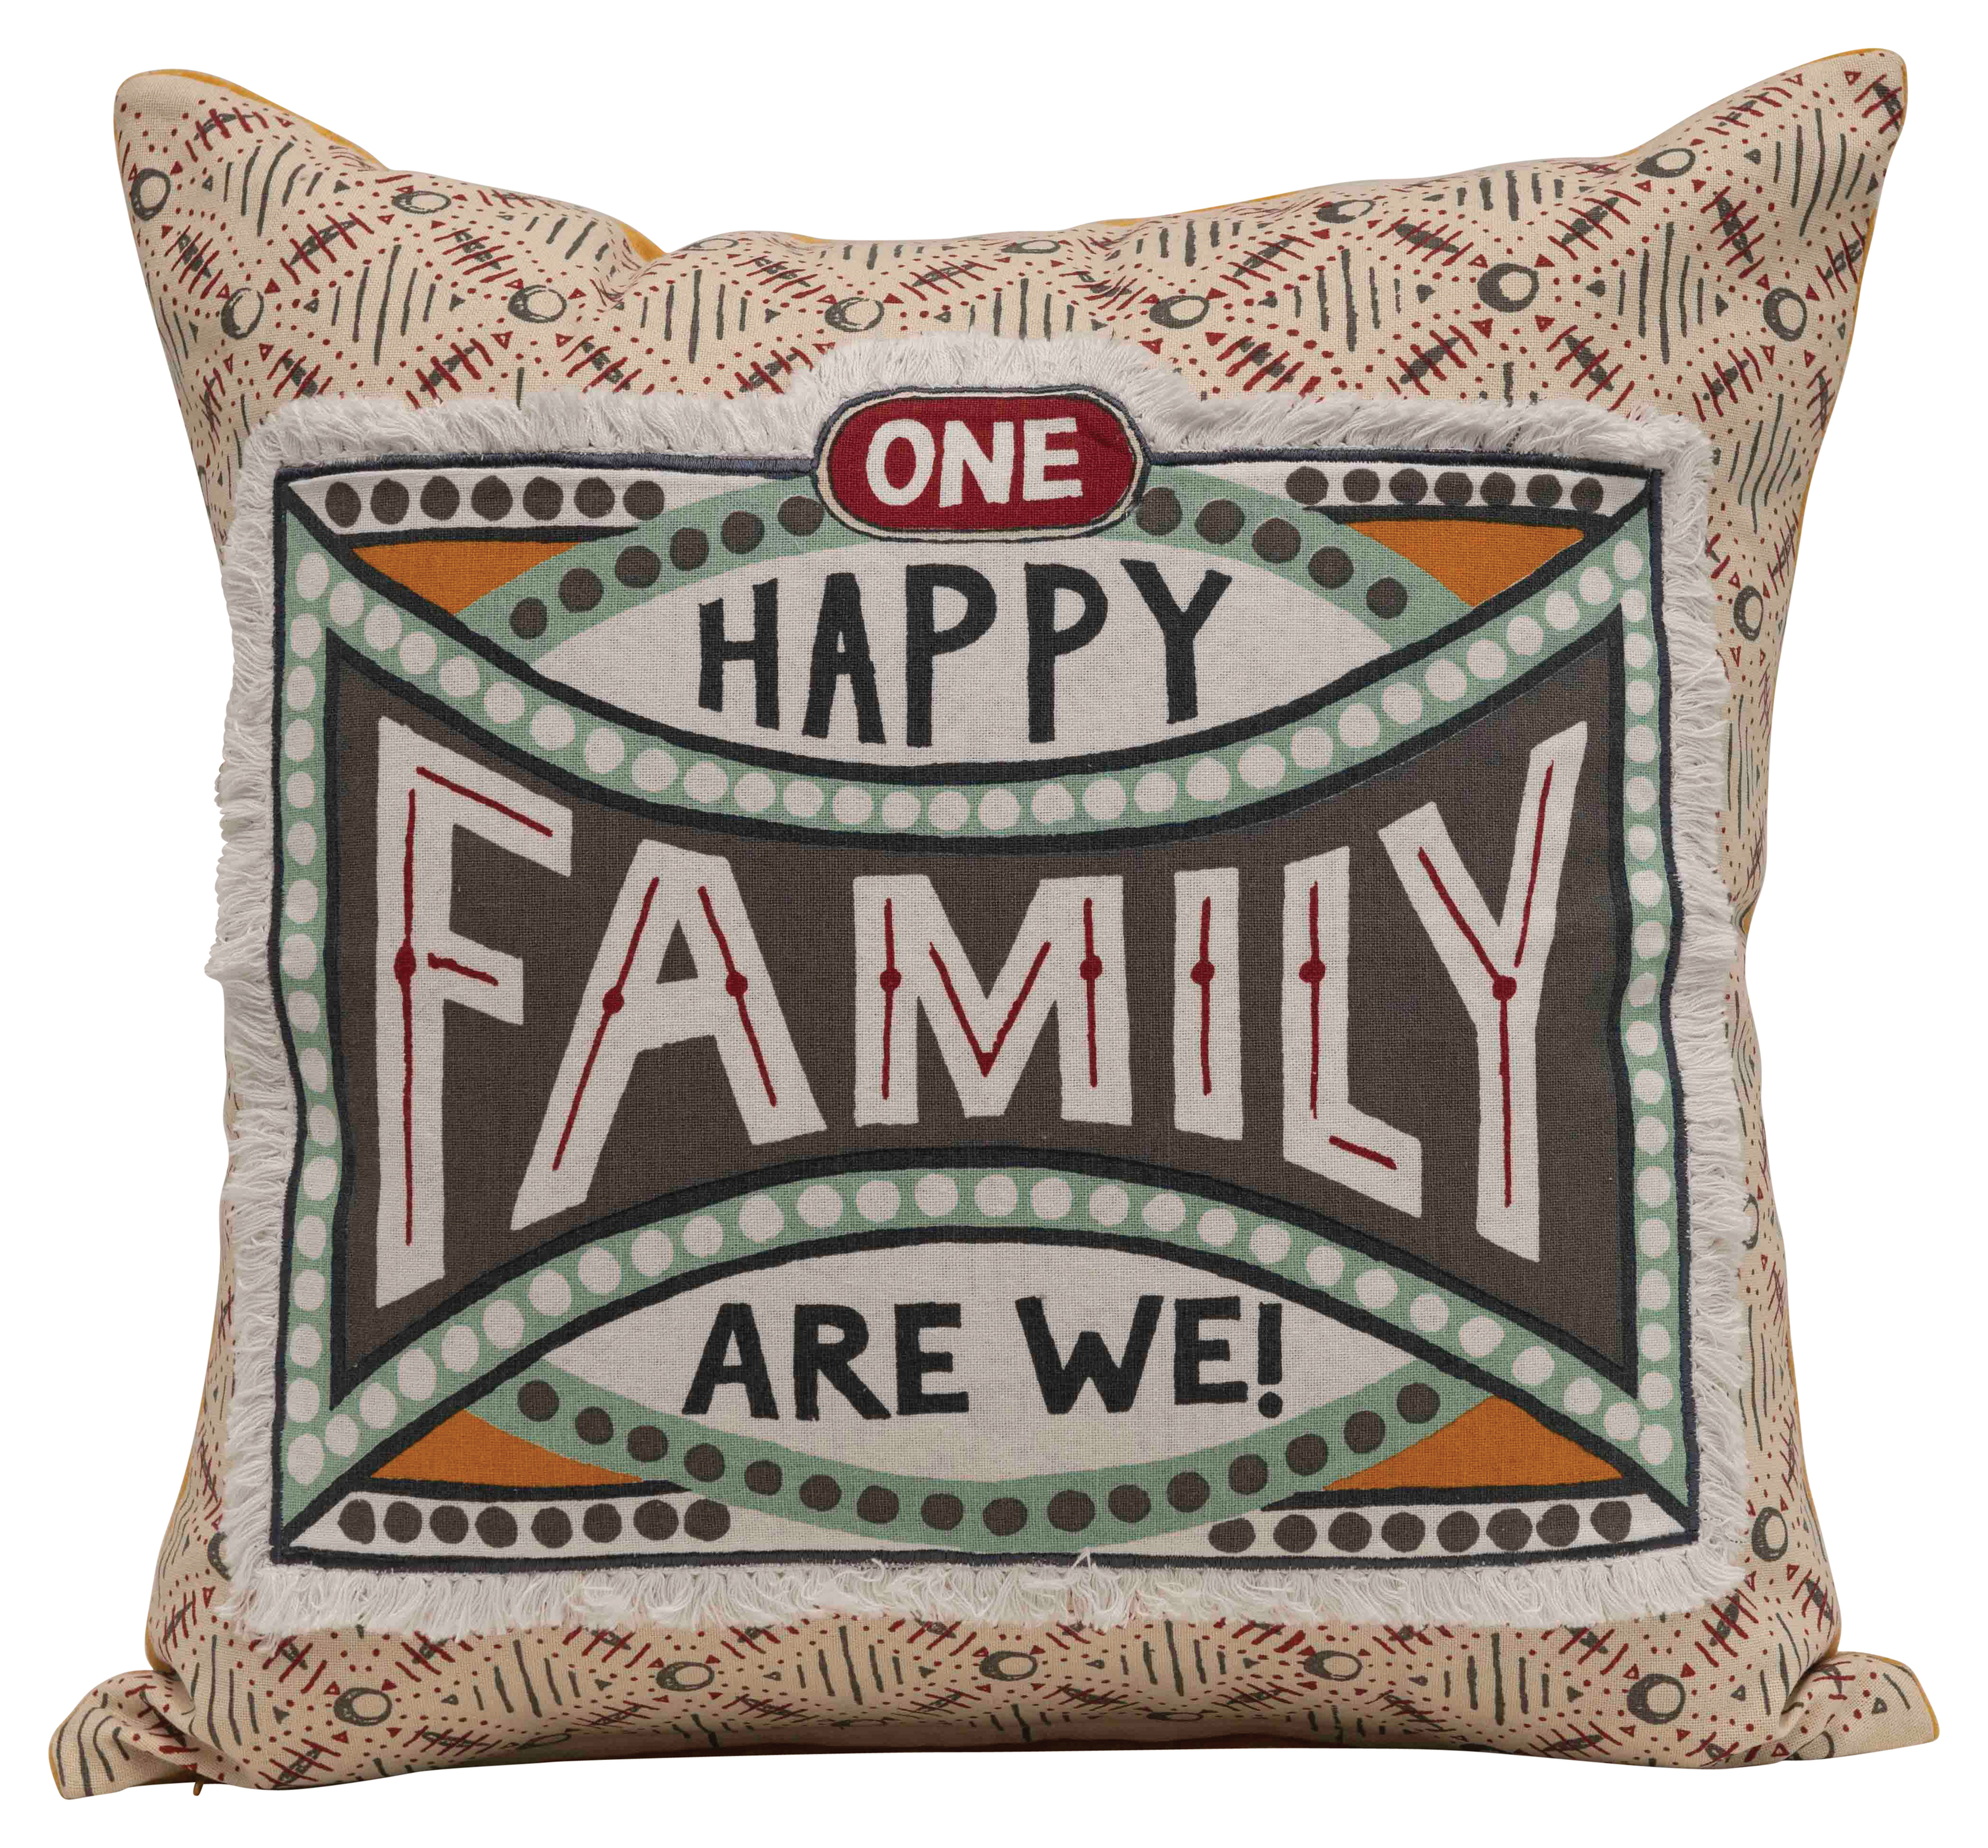 "One Happy Family Are We!" Reversible Cotton Stamp Pillow with Solid Back - Nomad Home